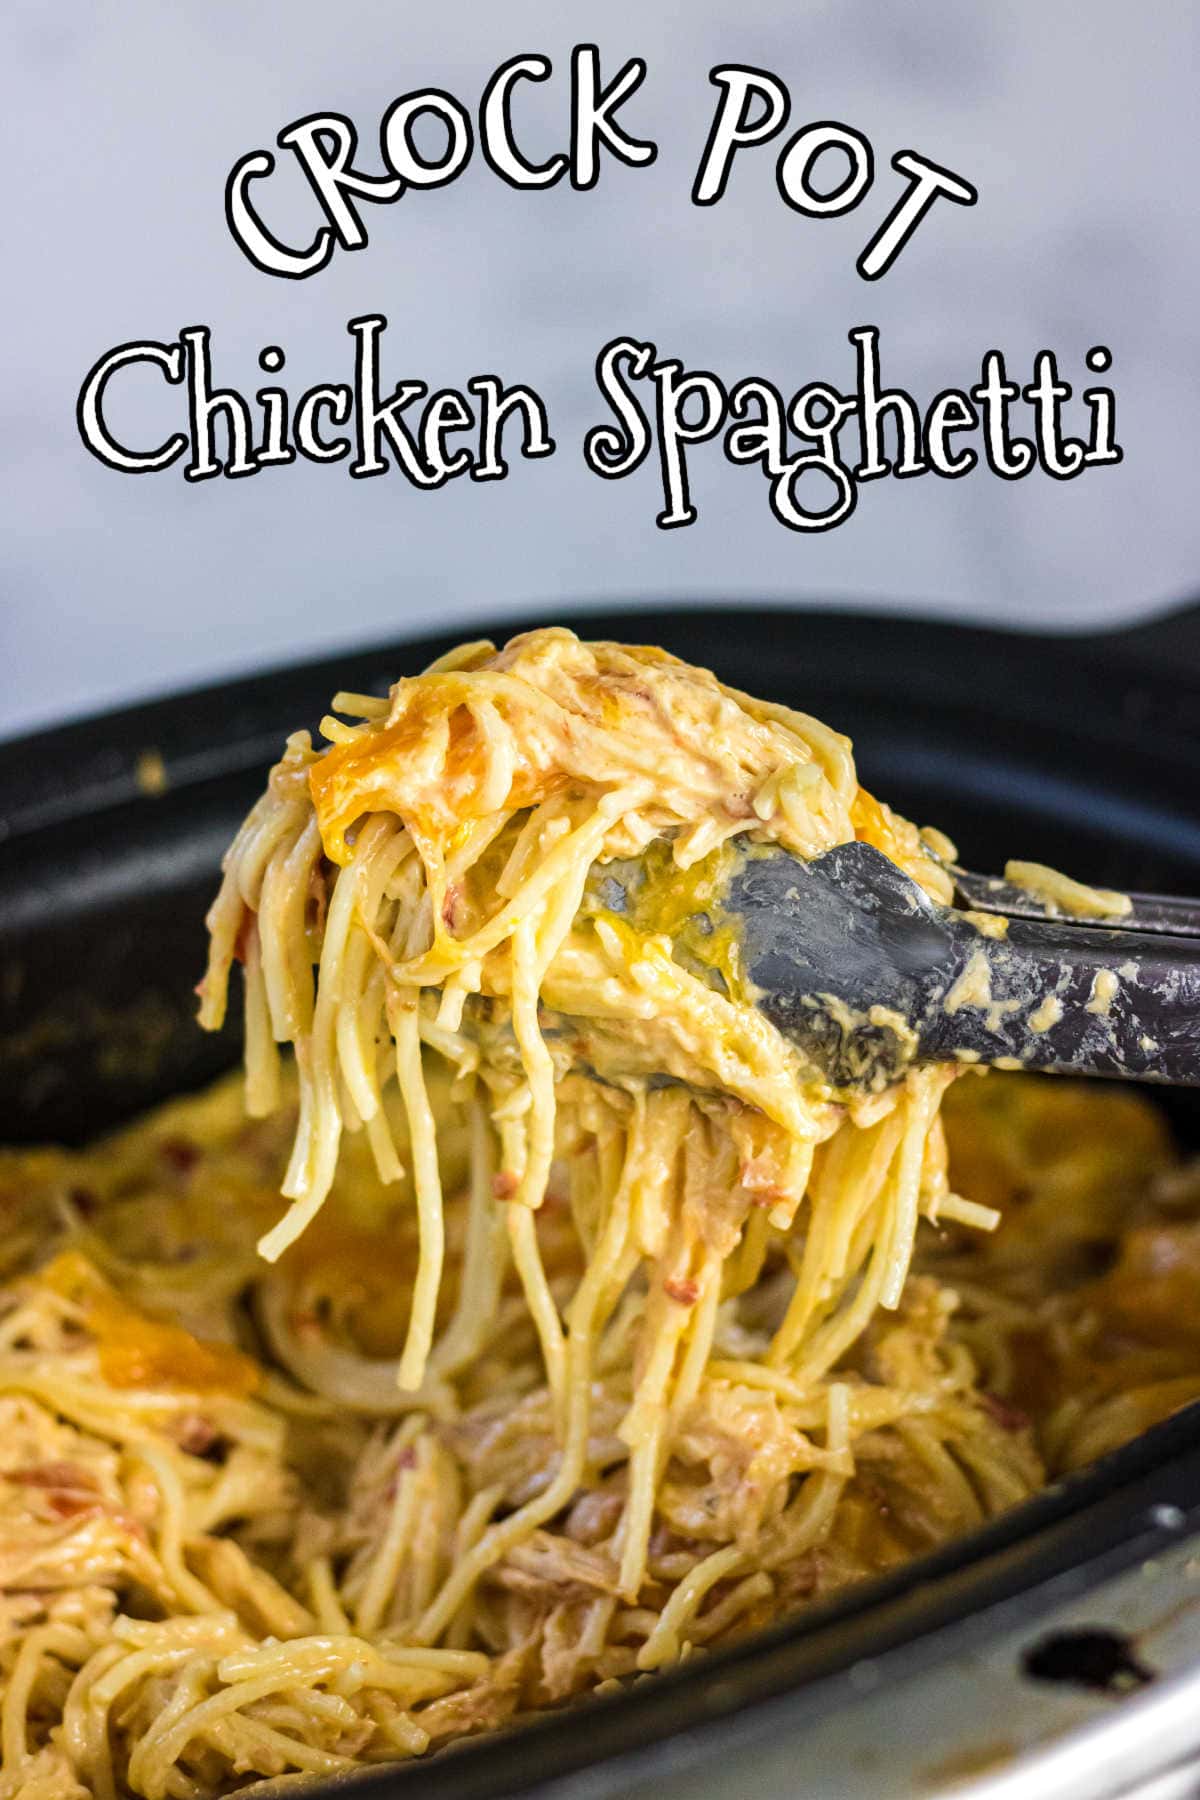 Tongs pulling a serving of chicken spaghetti from a crock pot.